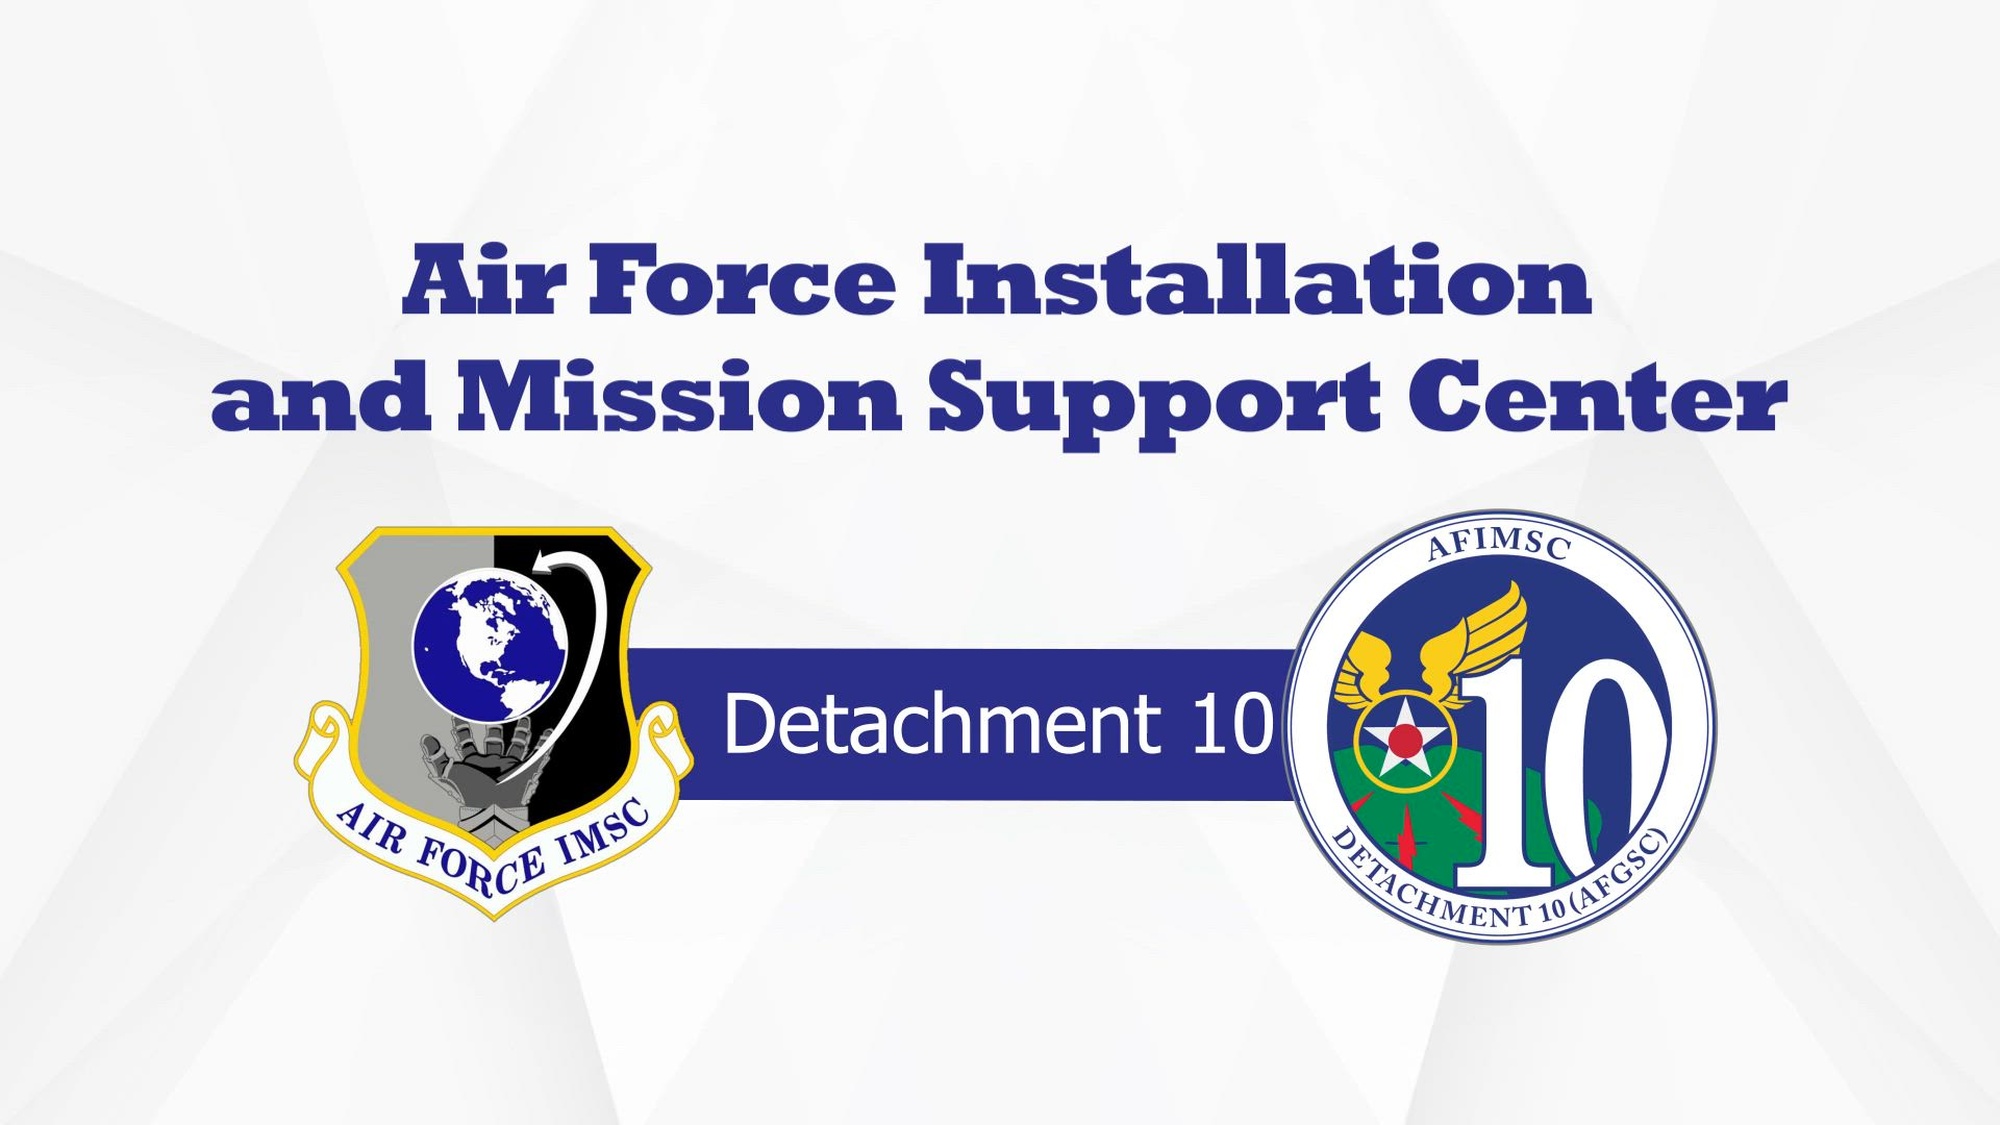 Air Force Installation and Mission Support Center Detachment 10 provides daily installation and mission support services to Air Force Global Strike Command that allows the organization to train combat-ready forces and tackle nuclear deterrence.